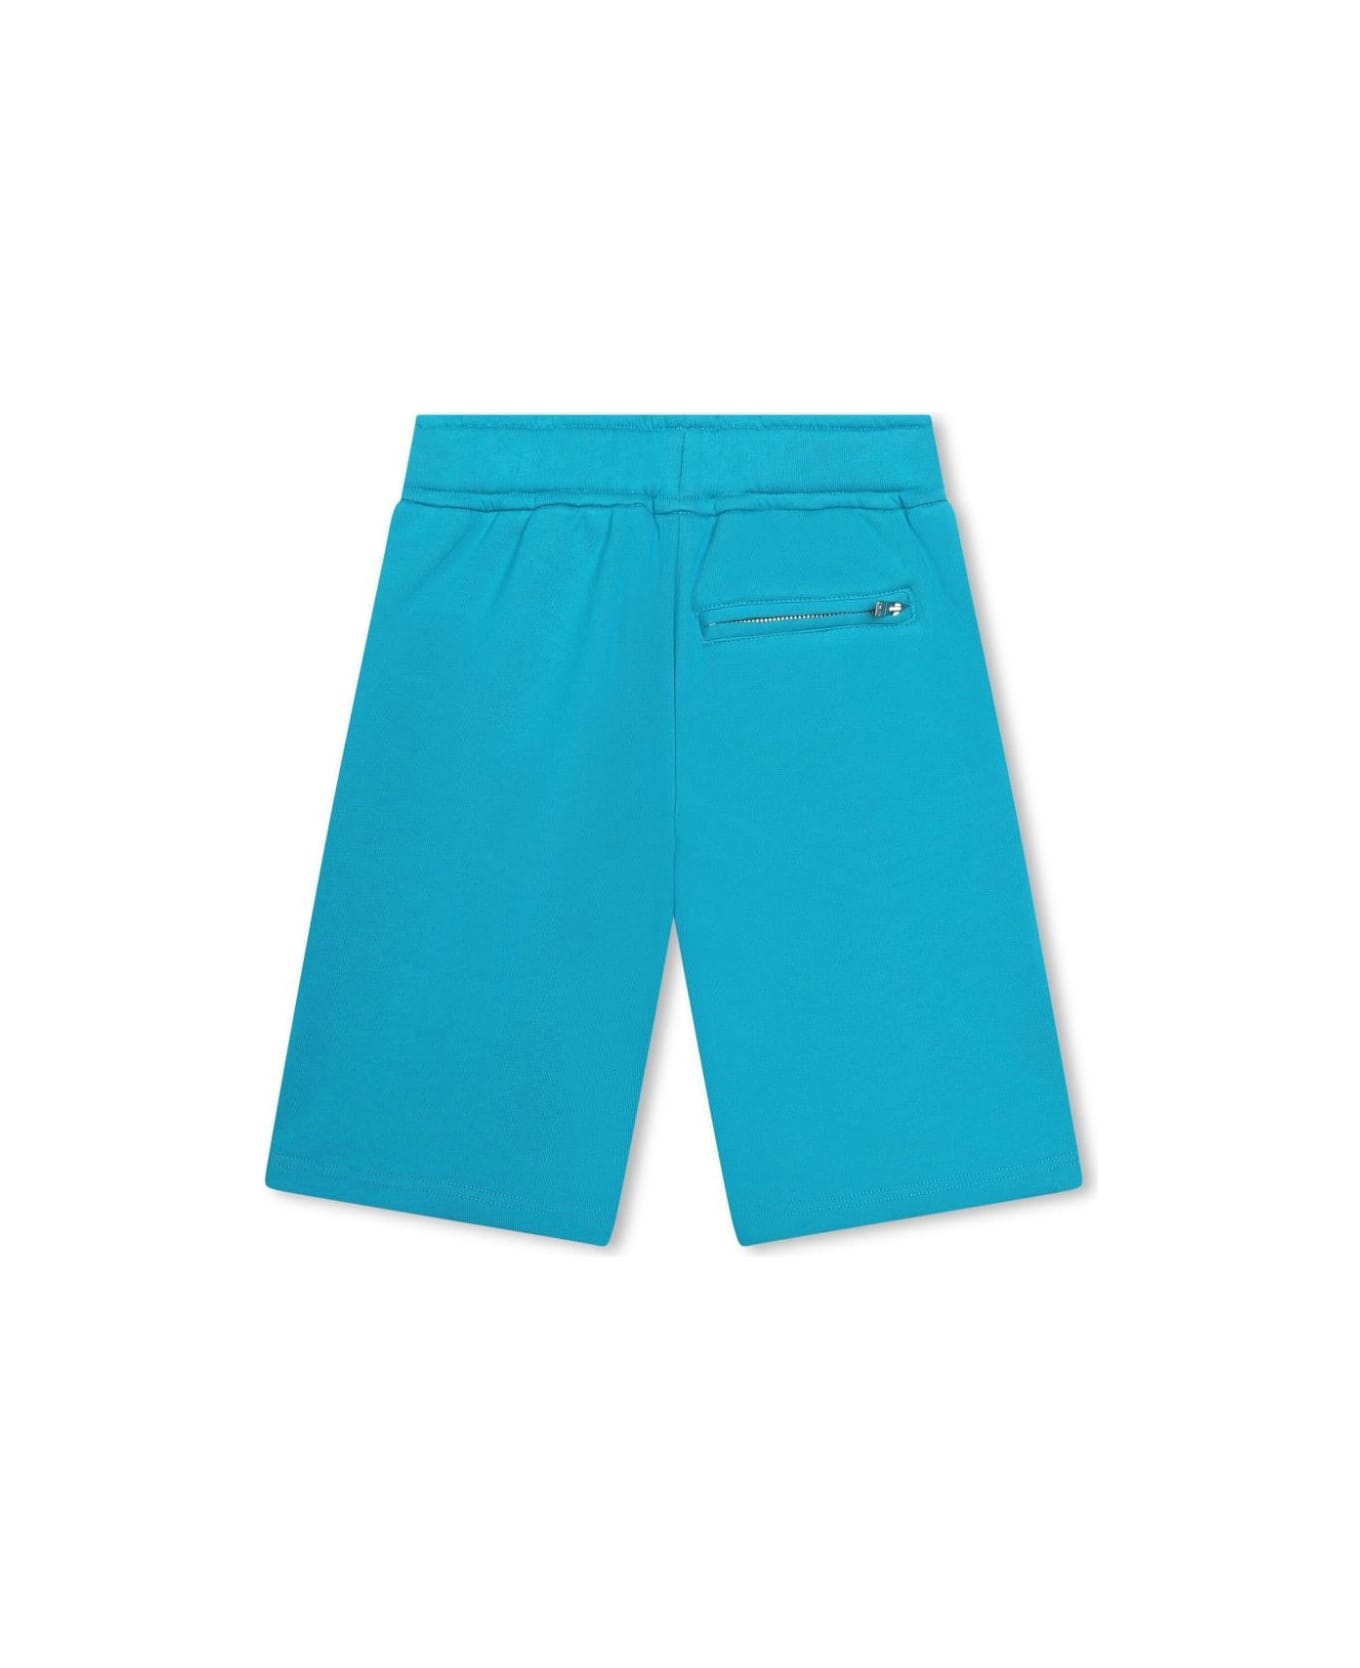 Lanvin Turquoise Shorts With Logo And 'curb' Motif - T Turchese